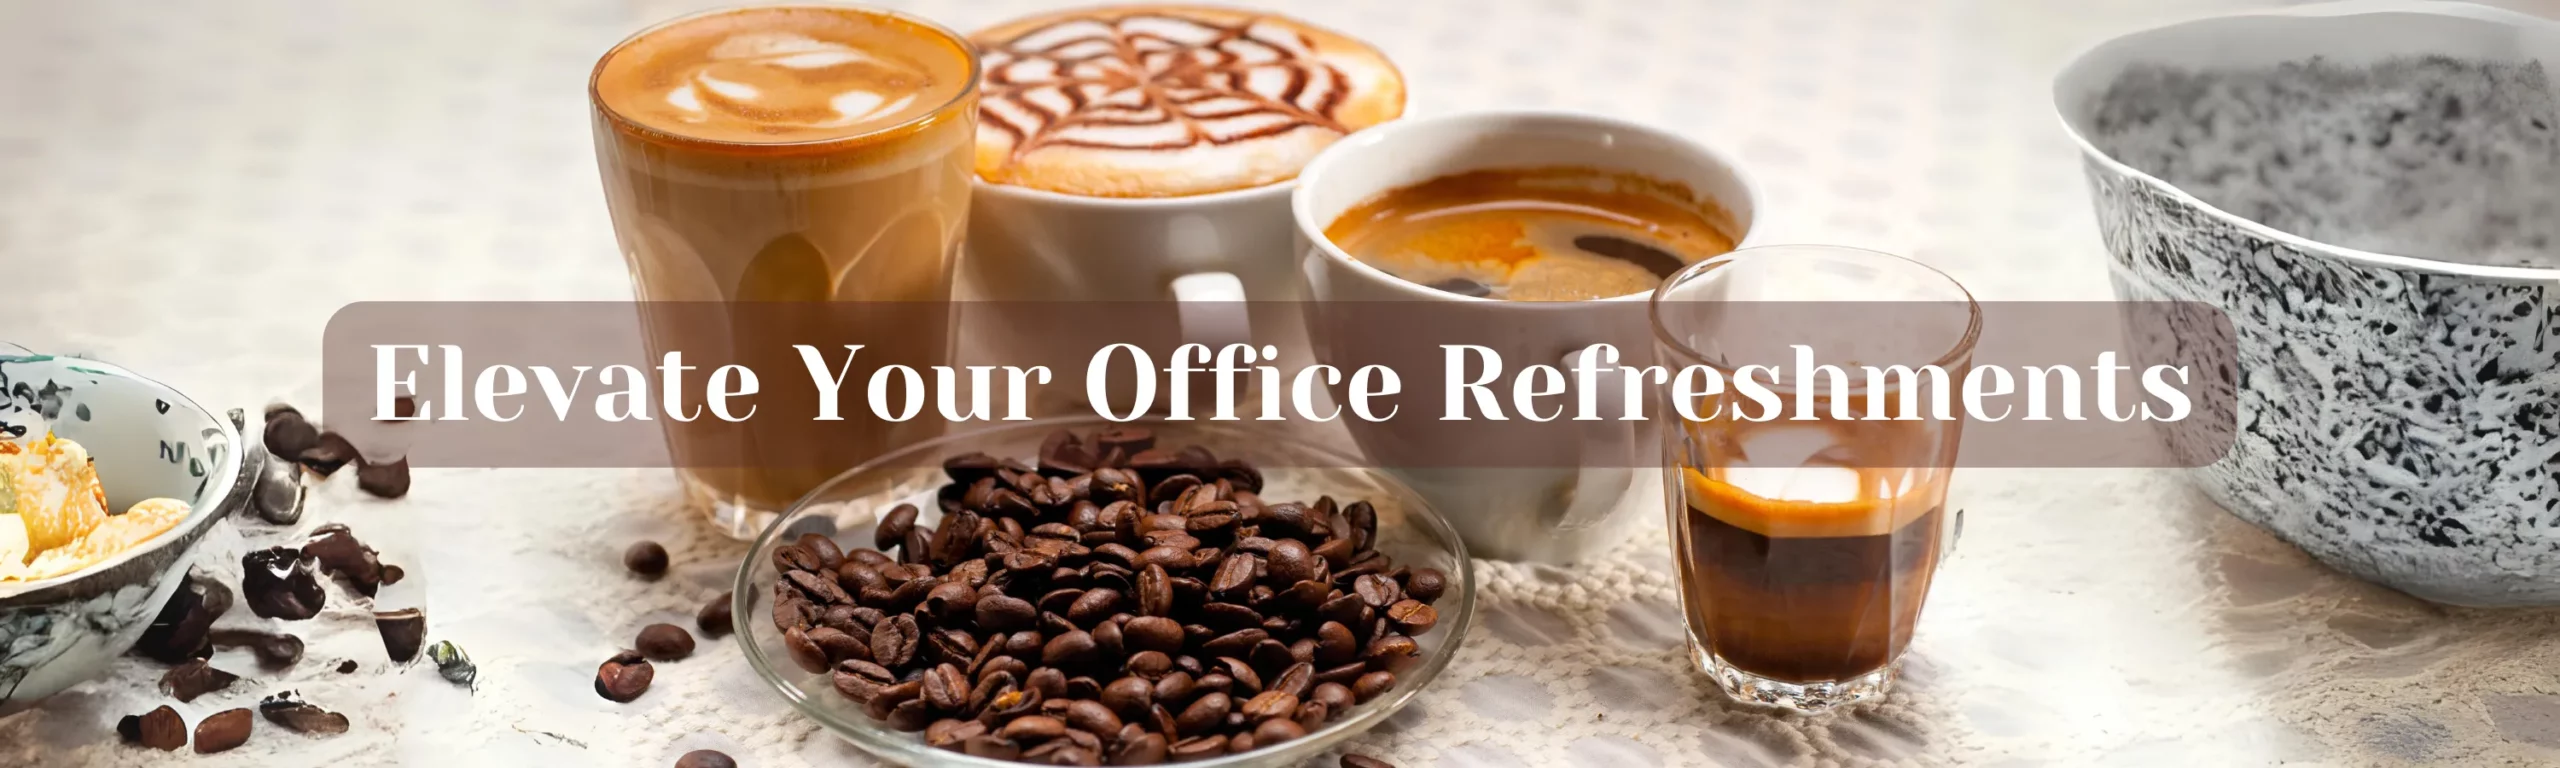 Elevate Your Office Refreshments